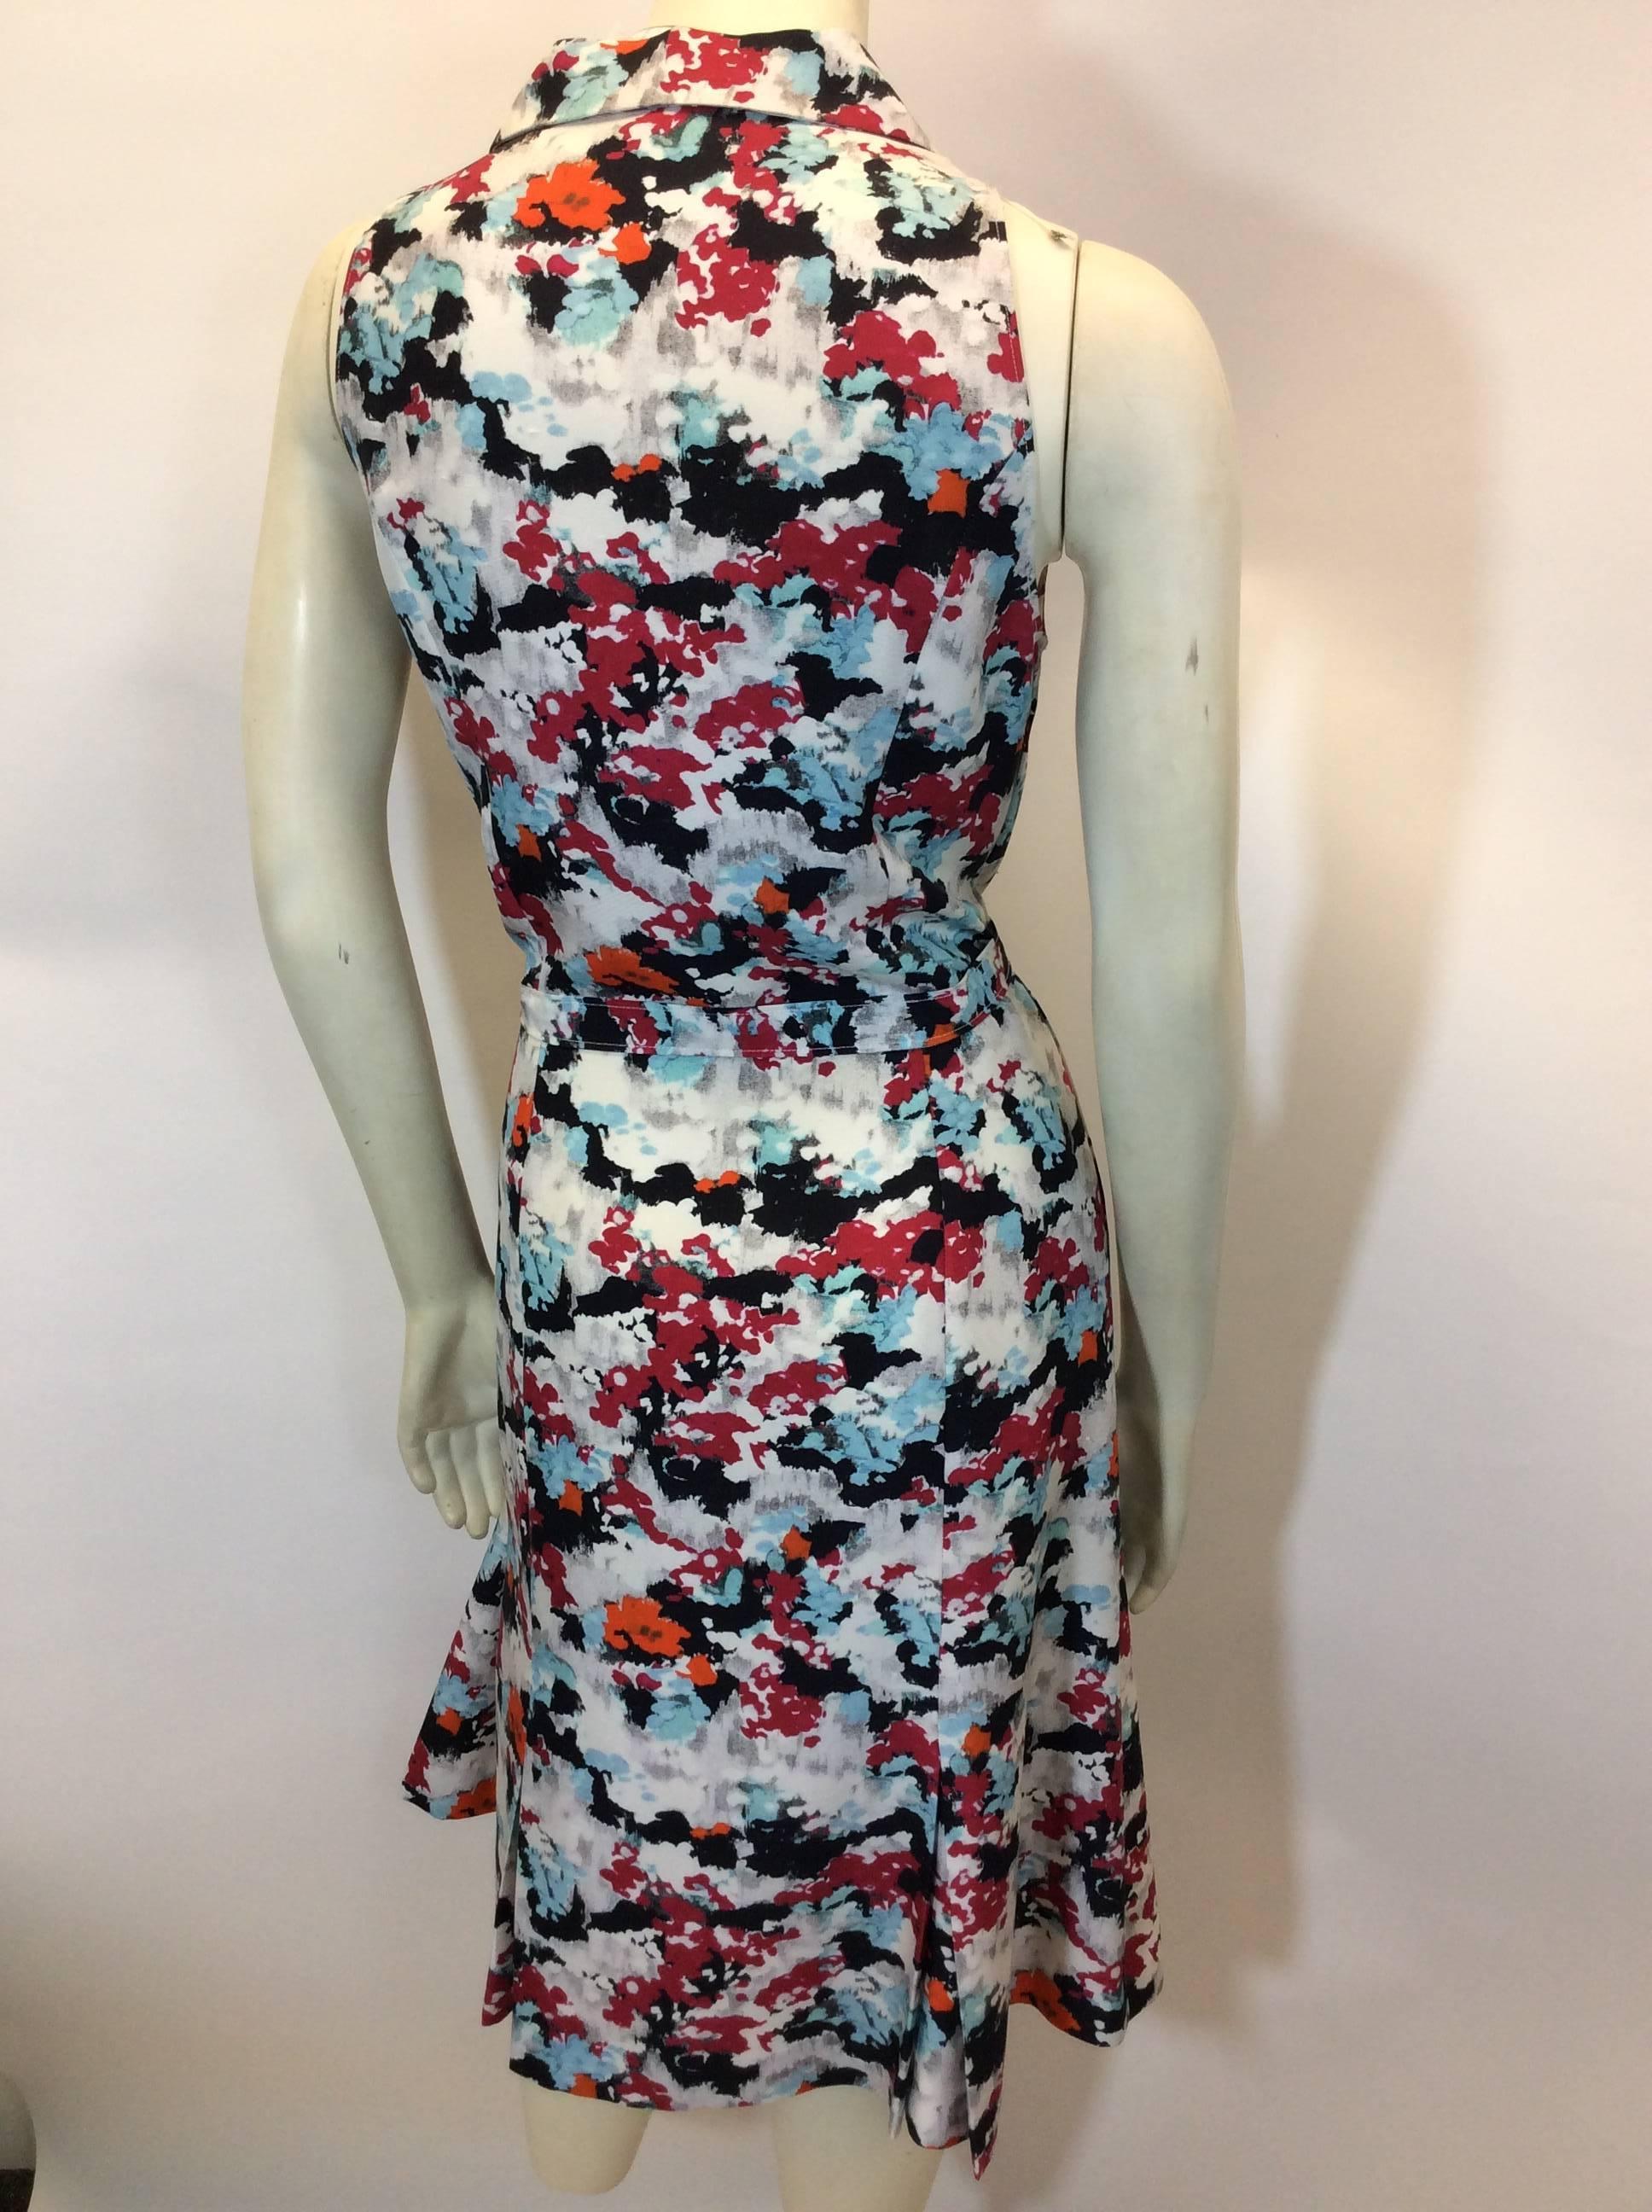 Carolina Herrera Abstract Printed Day Dress In Excellent Condition For Sale In Narberth, PA